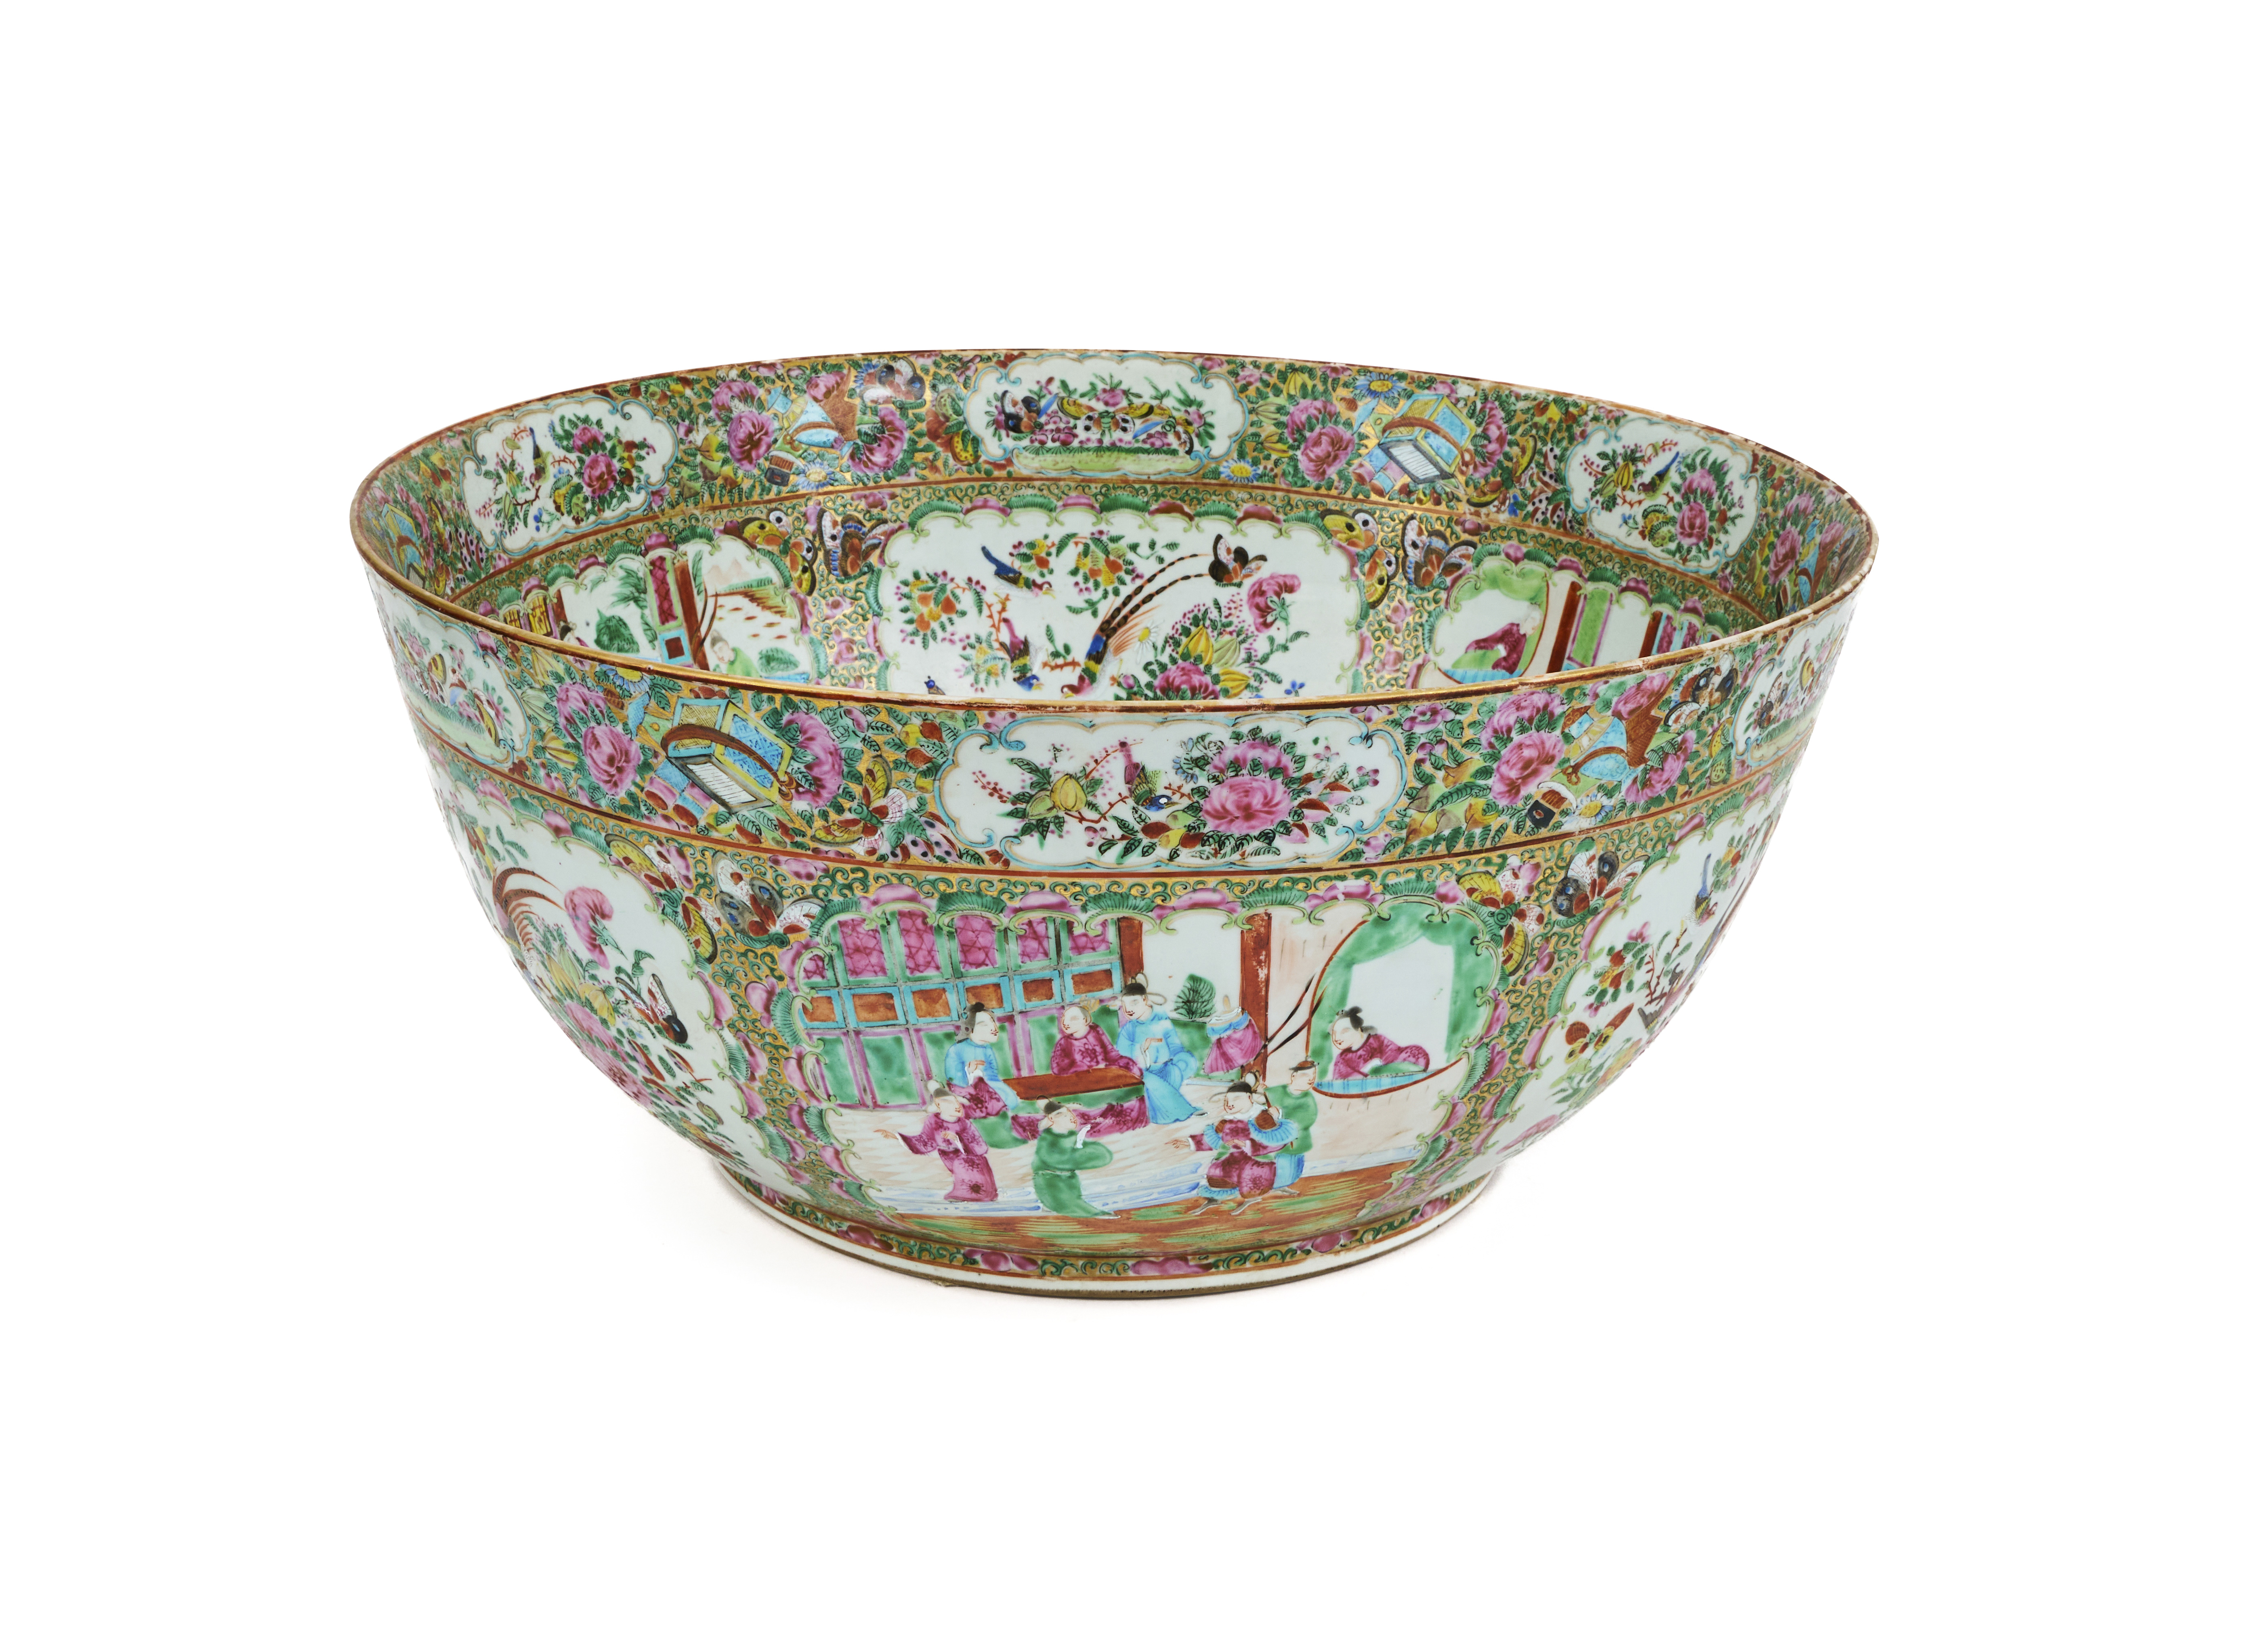 A MONUMENTAL CHINESE FAMILLE ROSE BOWL, 19TH CENTURY - Image 3 of 7